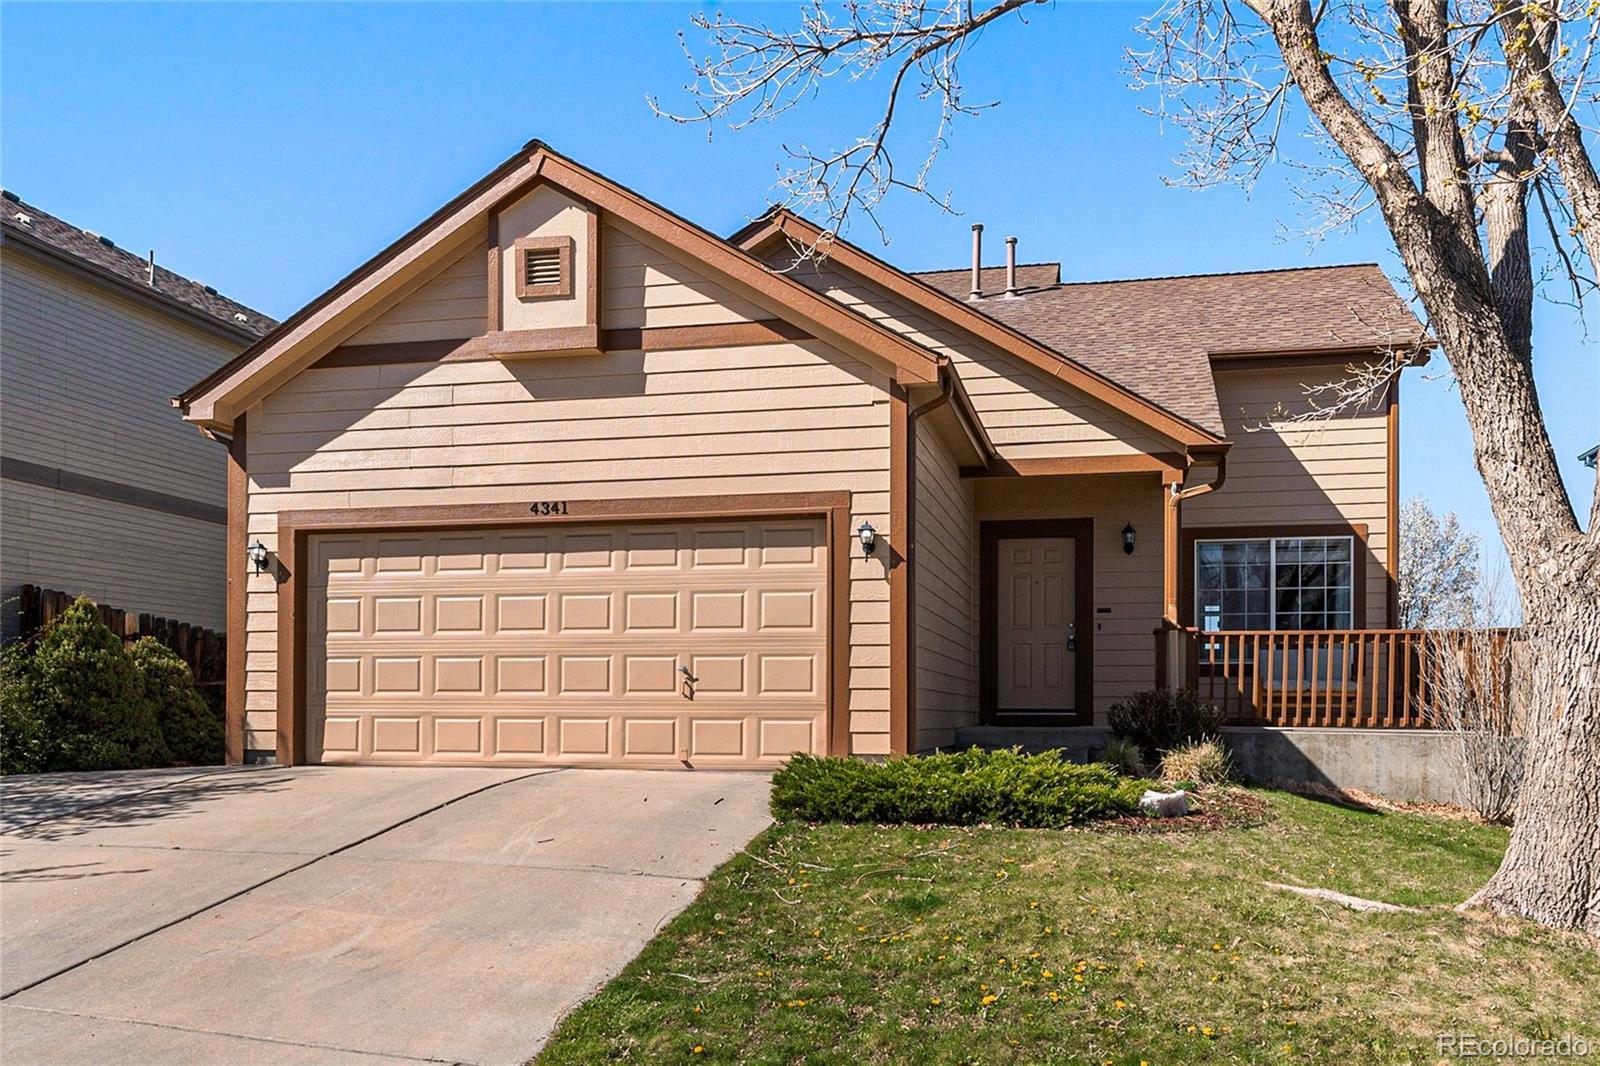 Photo one of 4341 Broemel Ave Broomfield CO 80020 | MLS 9033542